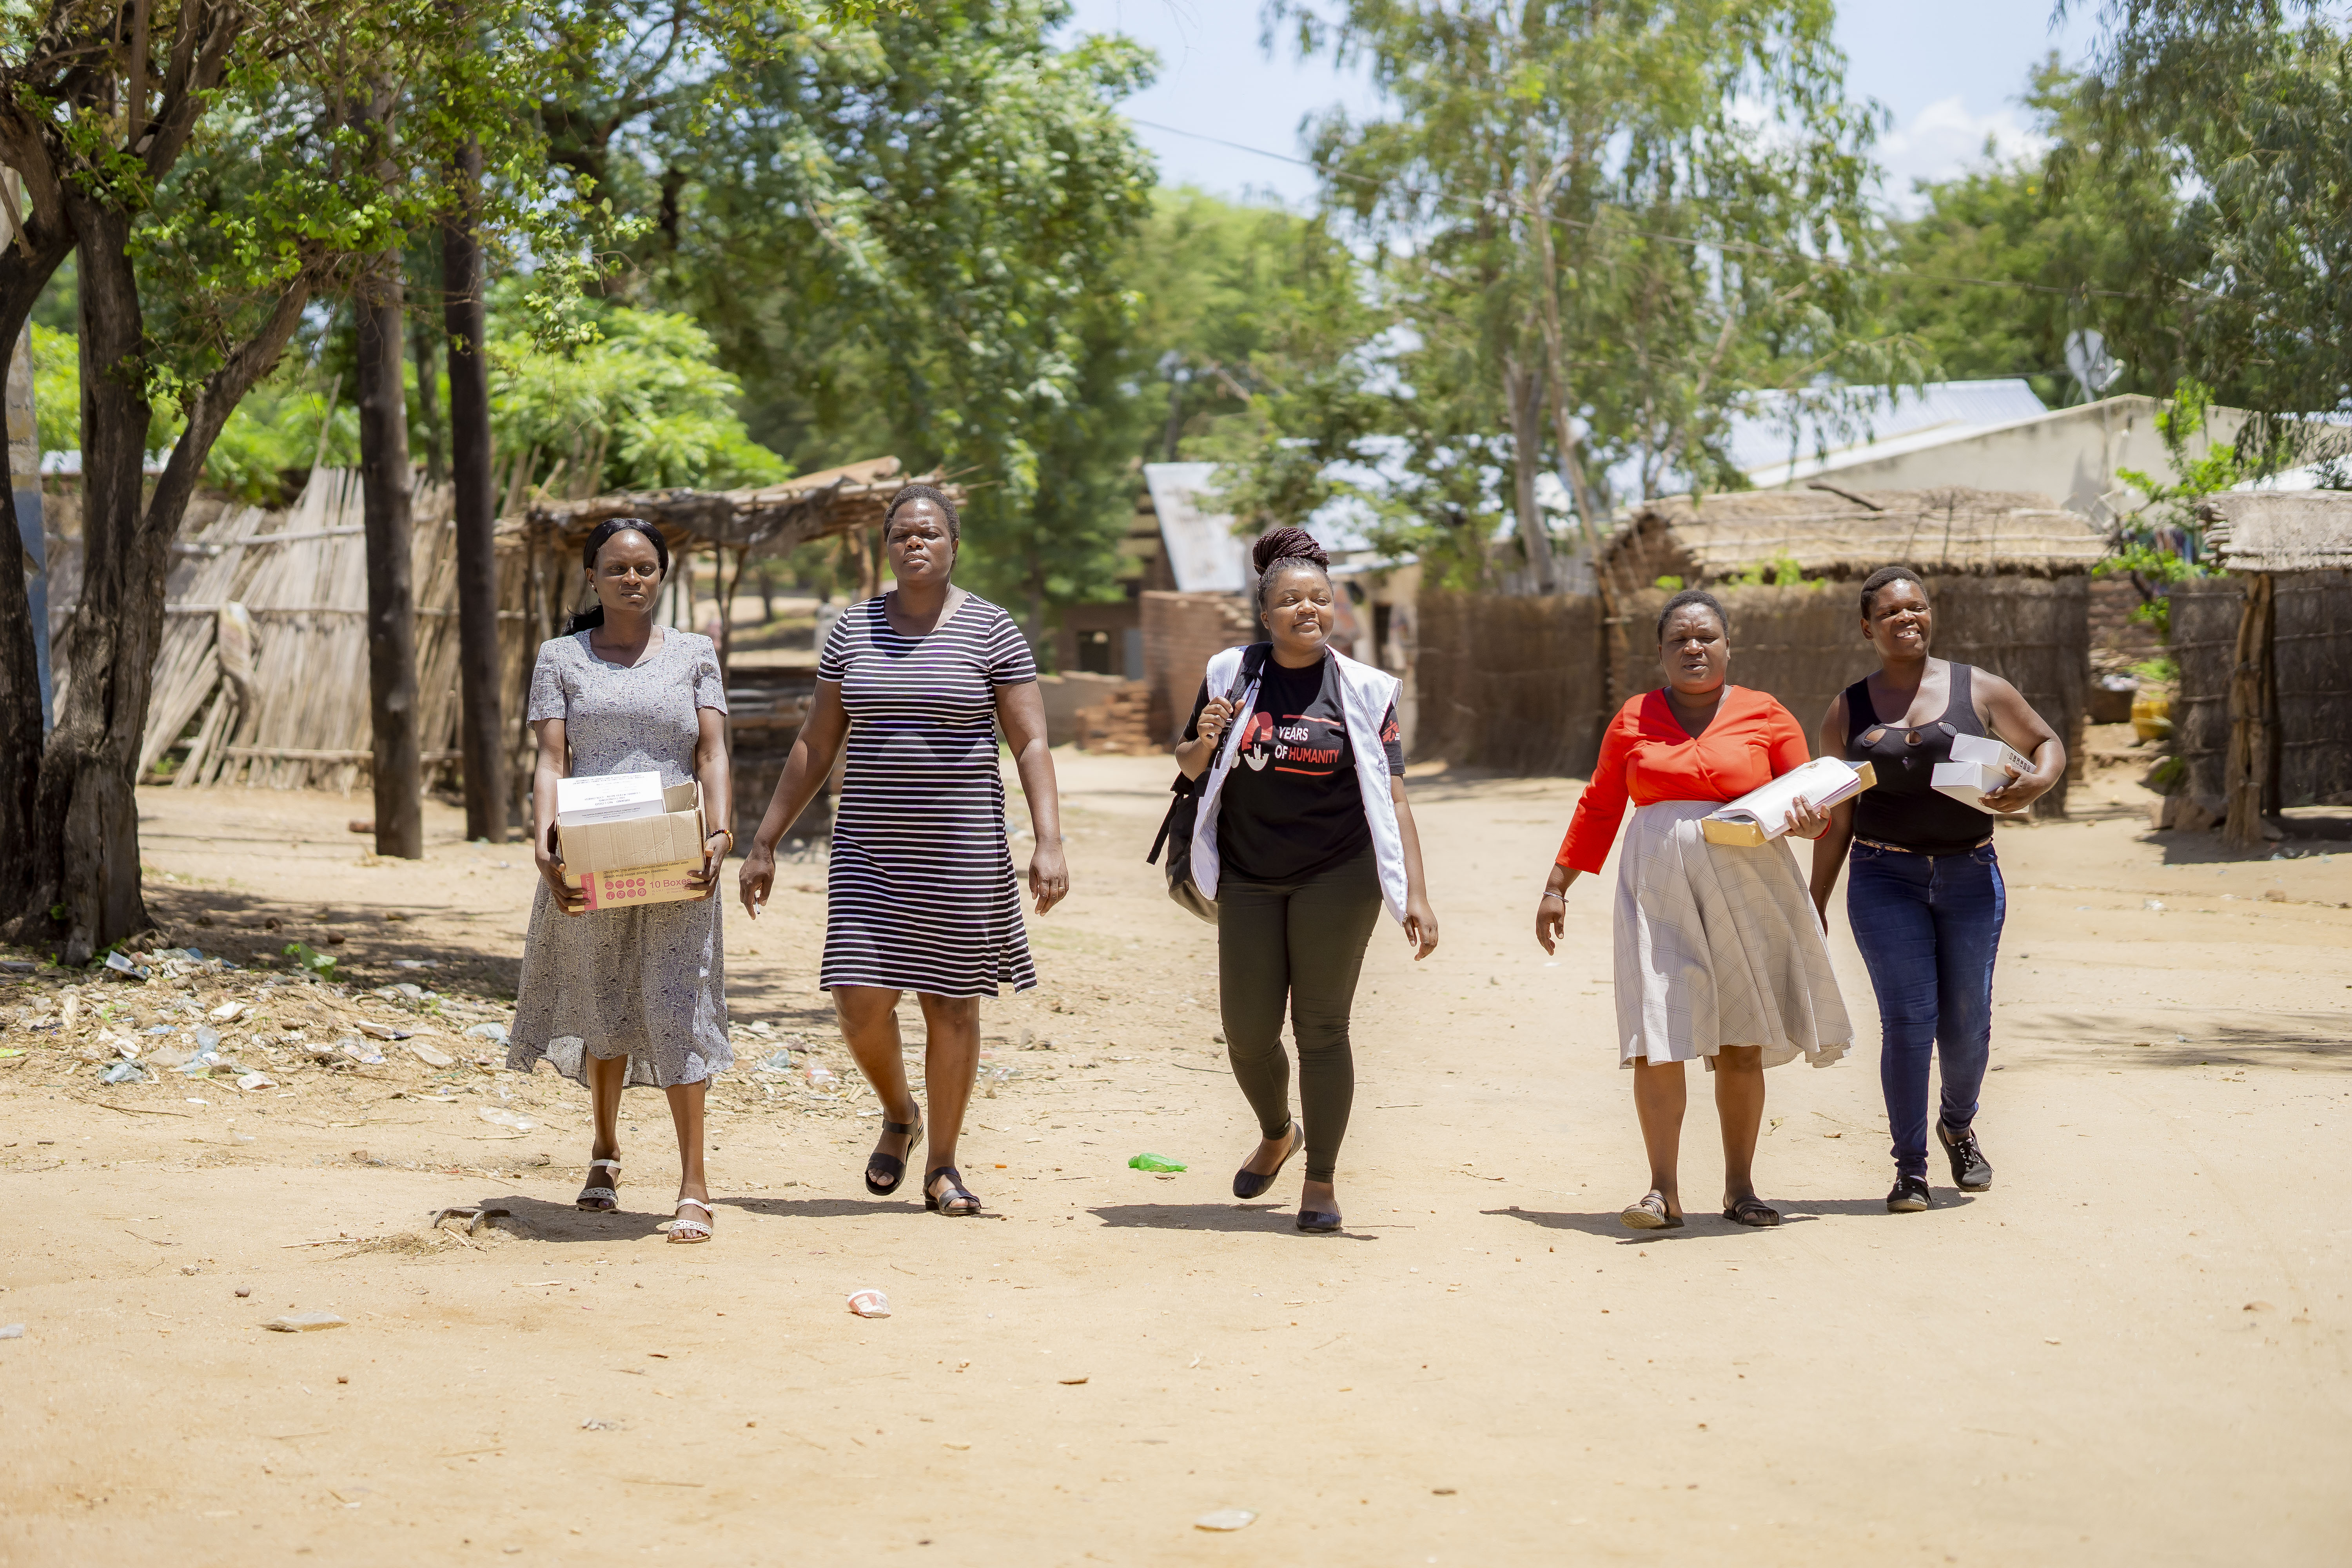 msf_community_engagement_technical_capacity_manager_gloria_mwambazi_centre_accompanies_msf_midwife_christine_second_from_left_and_members_of_tikondane_community-based_organisation_from_left_to_right_cecilia.jpg